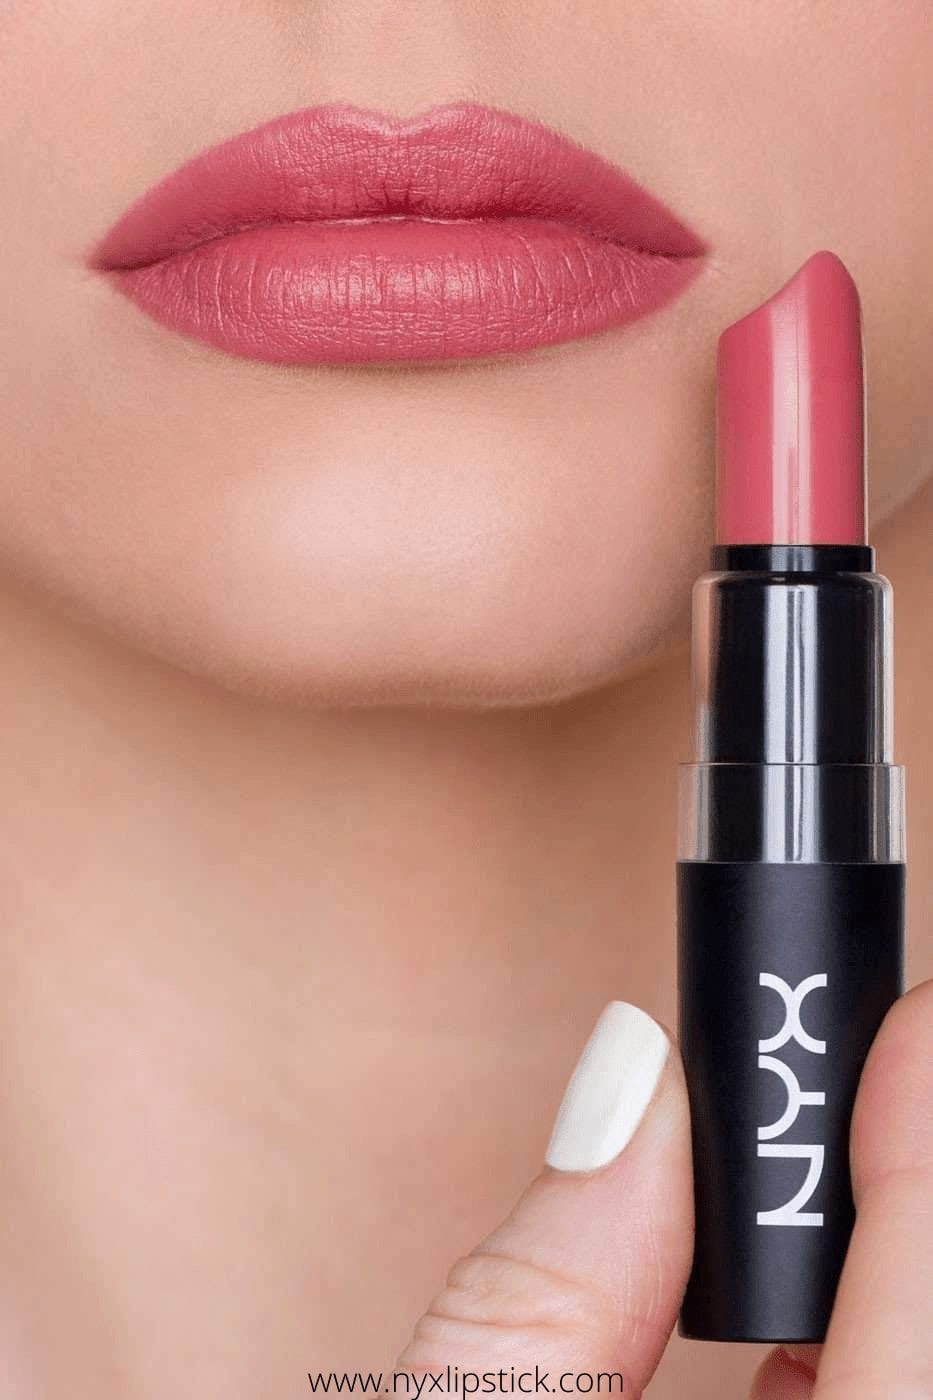 Nyx matte lipstick “Crave” Review & My Experience